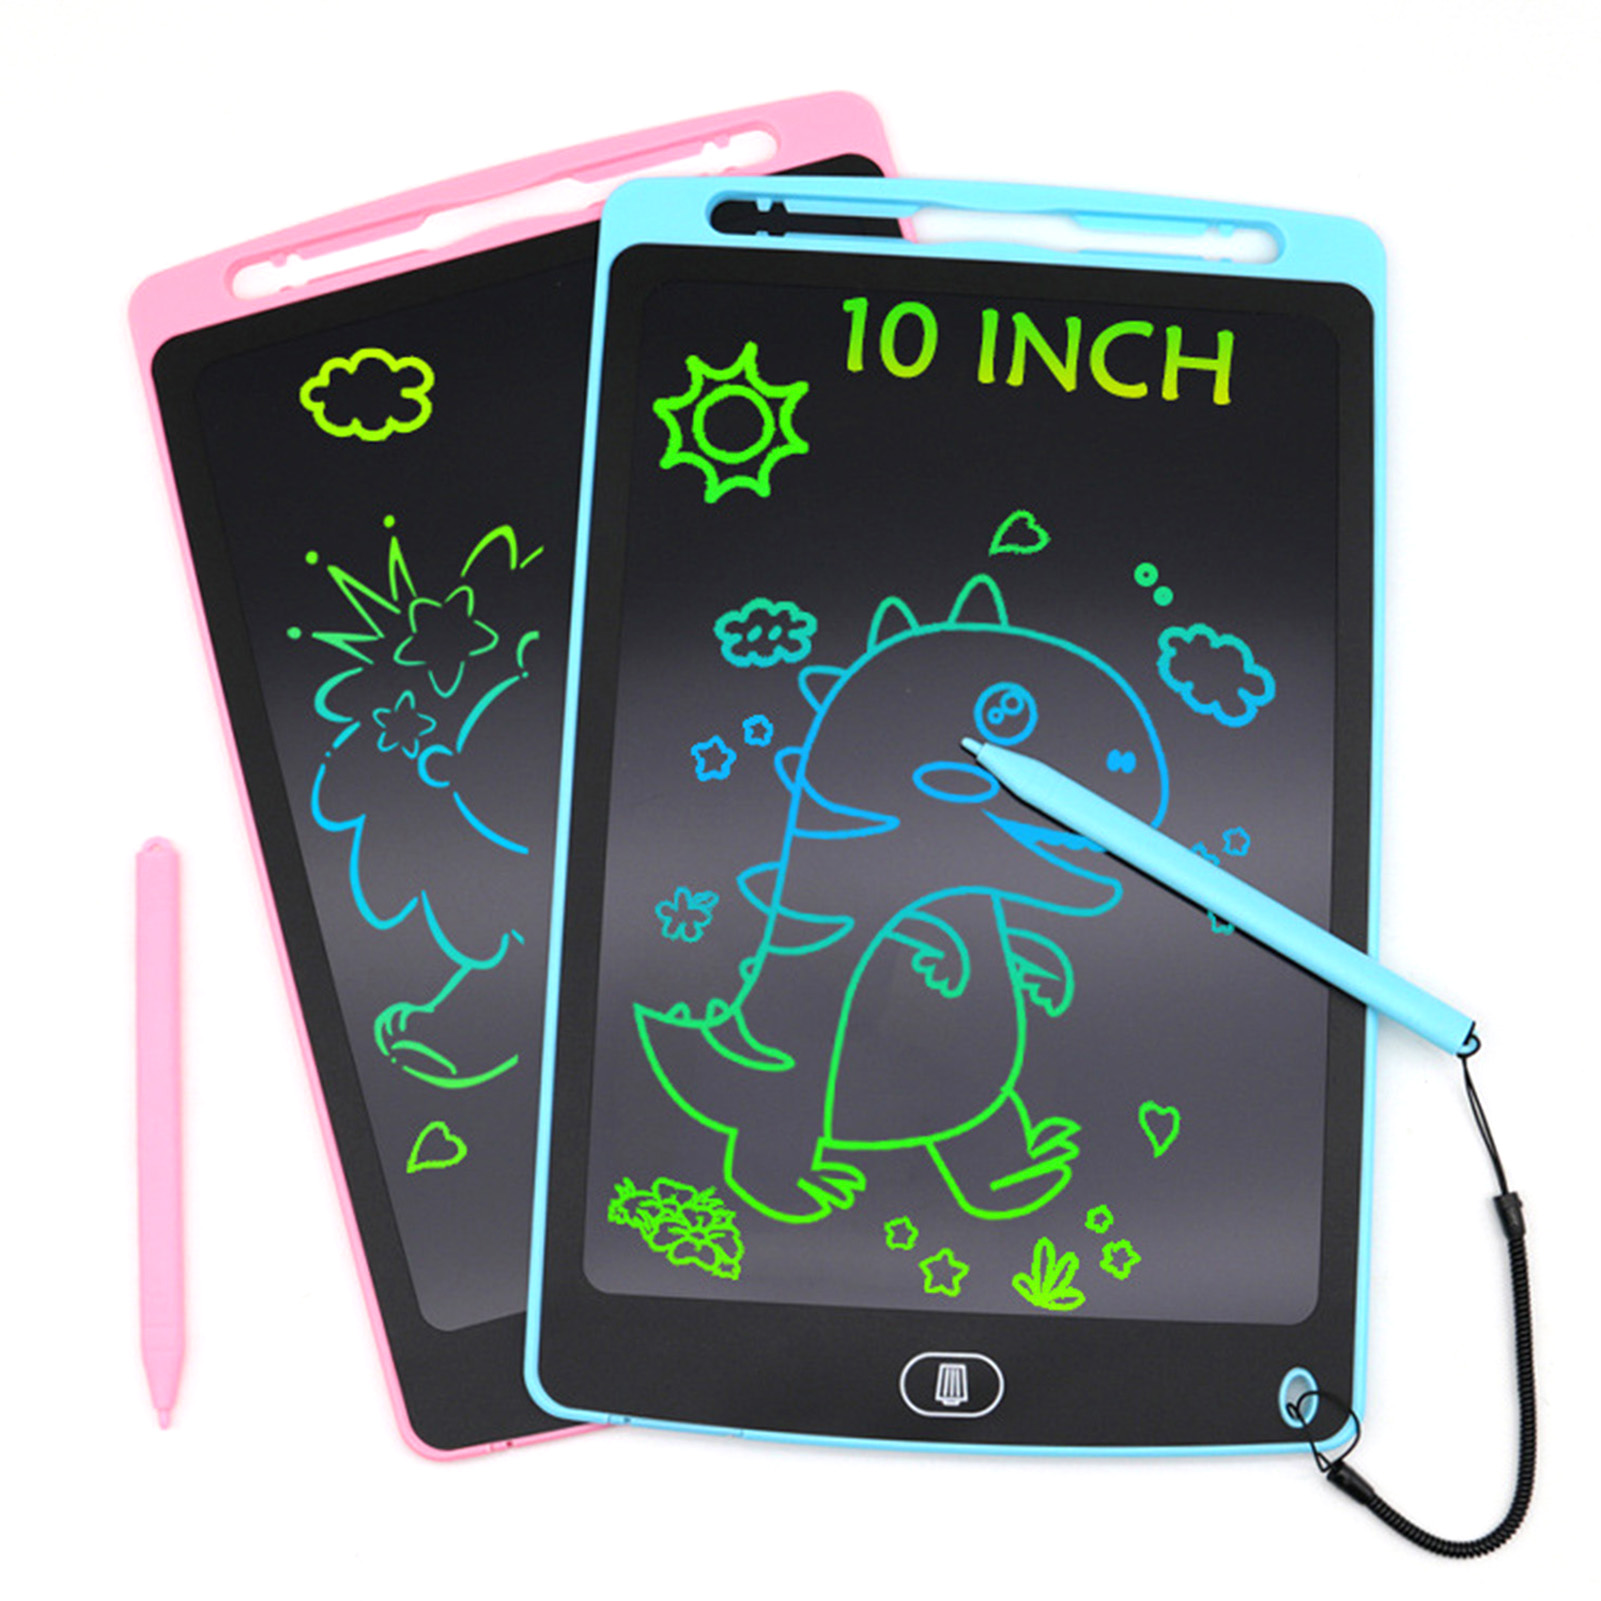 Colorful Doodle Board Drawing Tablet Large Screen Waterproof Lcd Writing